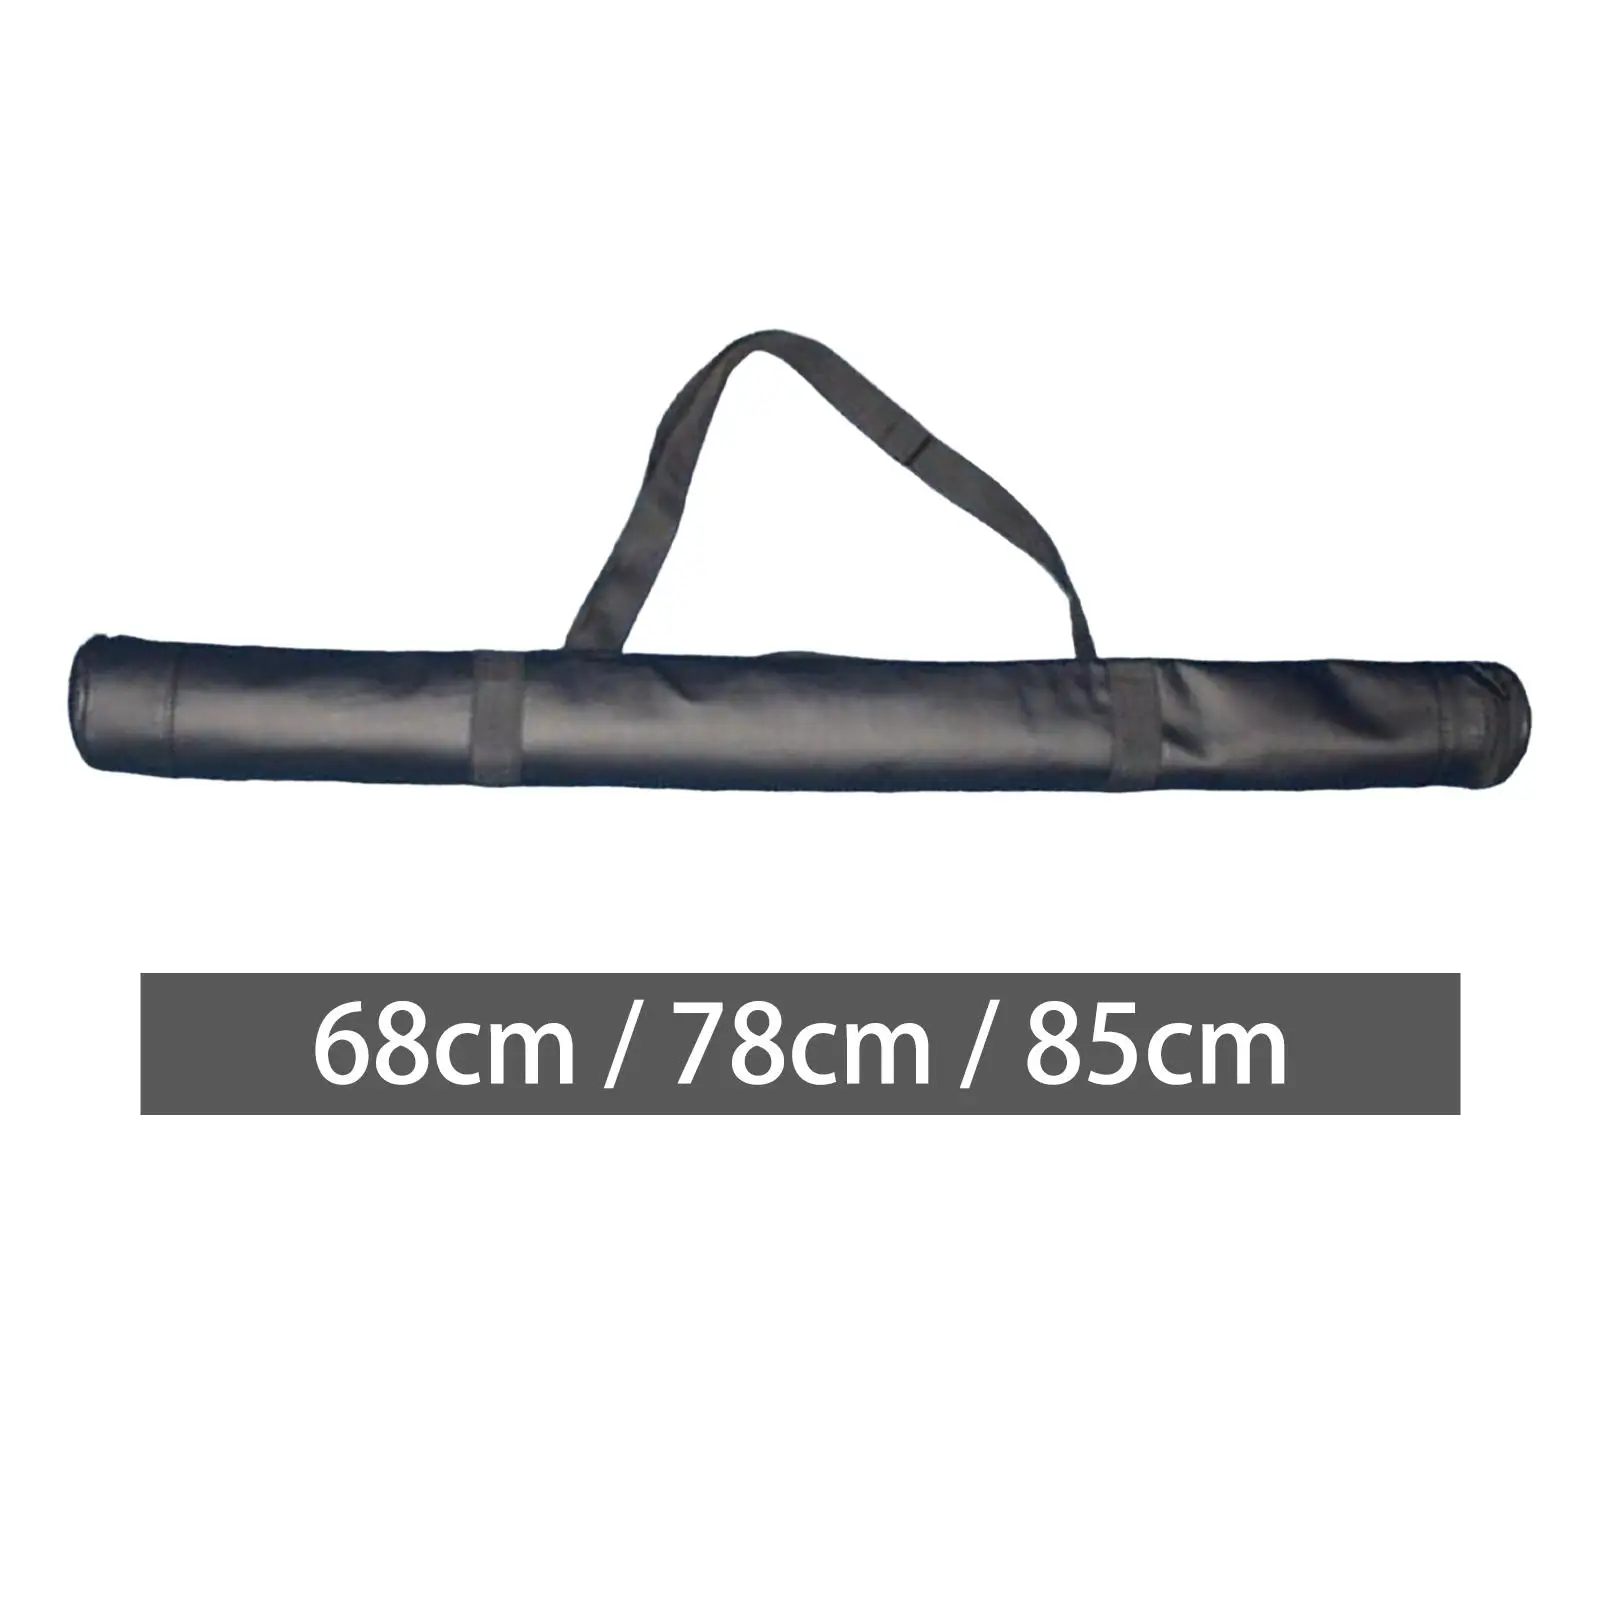 Billiard Pool Cue Bag Snooker Cue Lightweight Cover Carrying Case Accessory